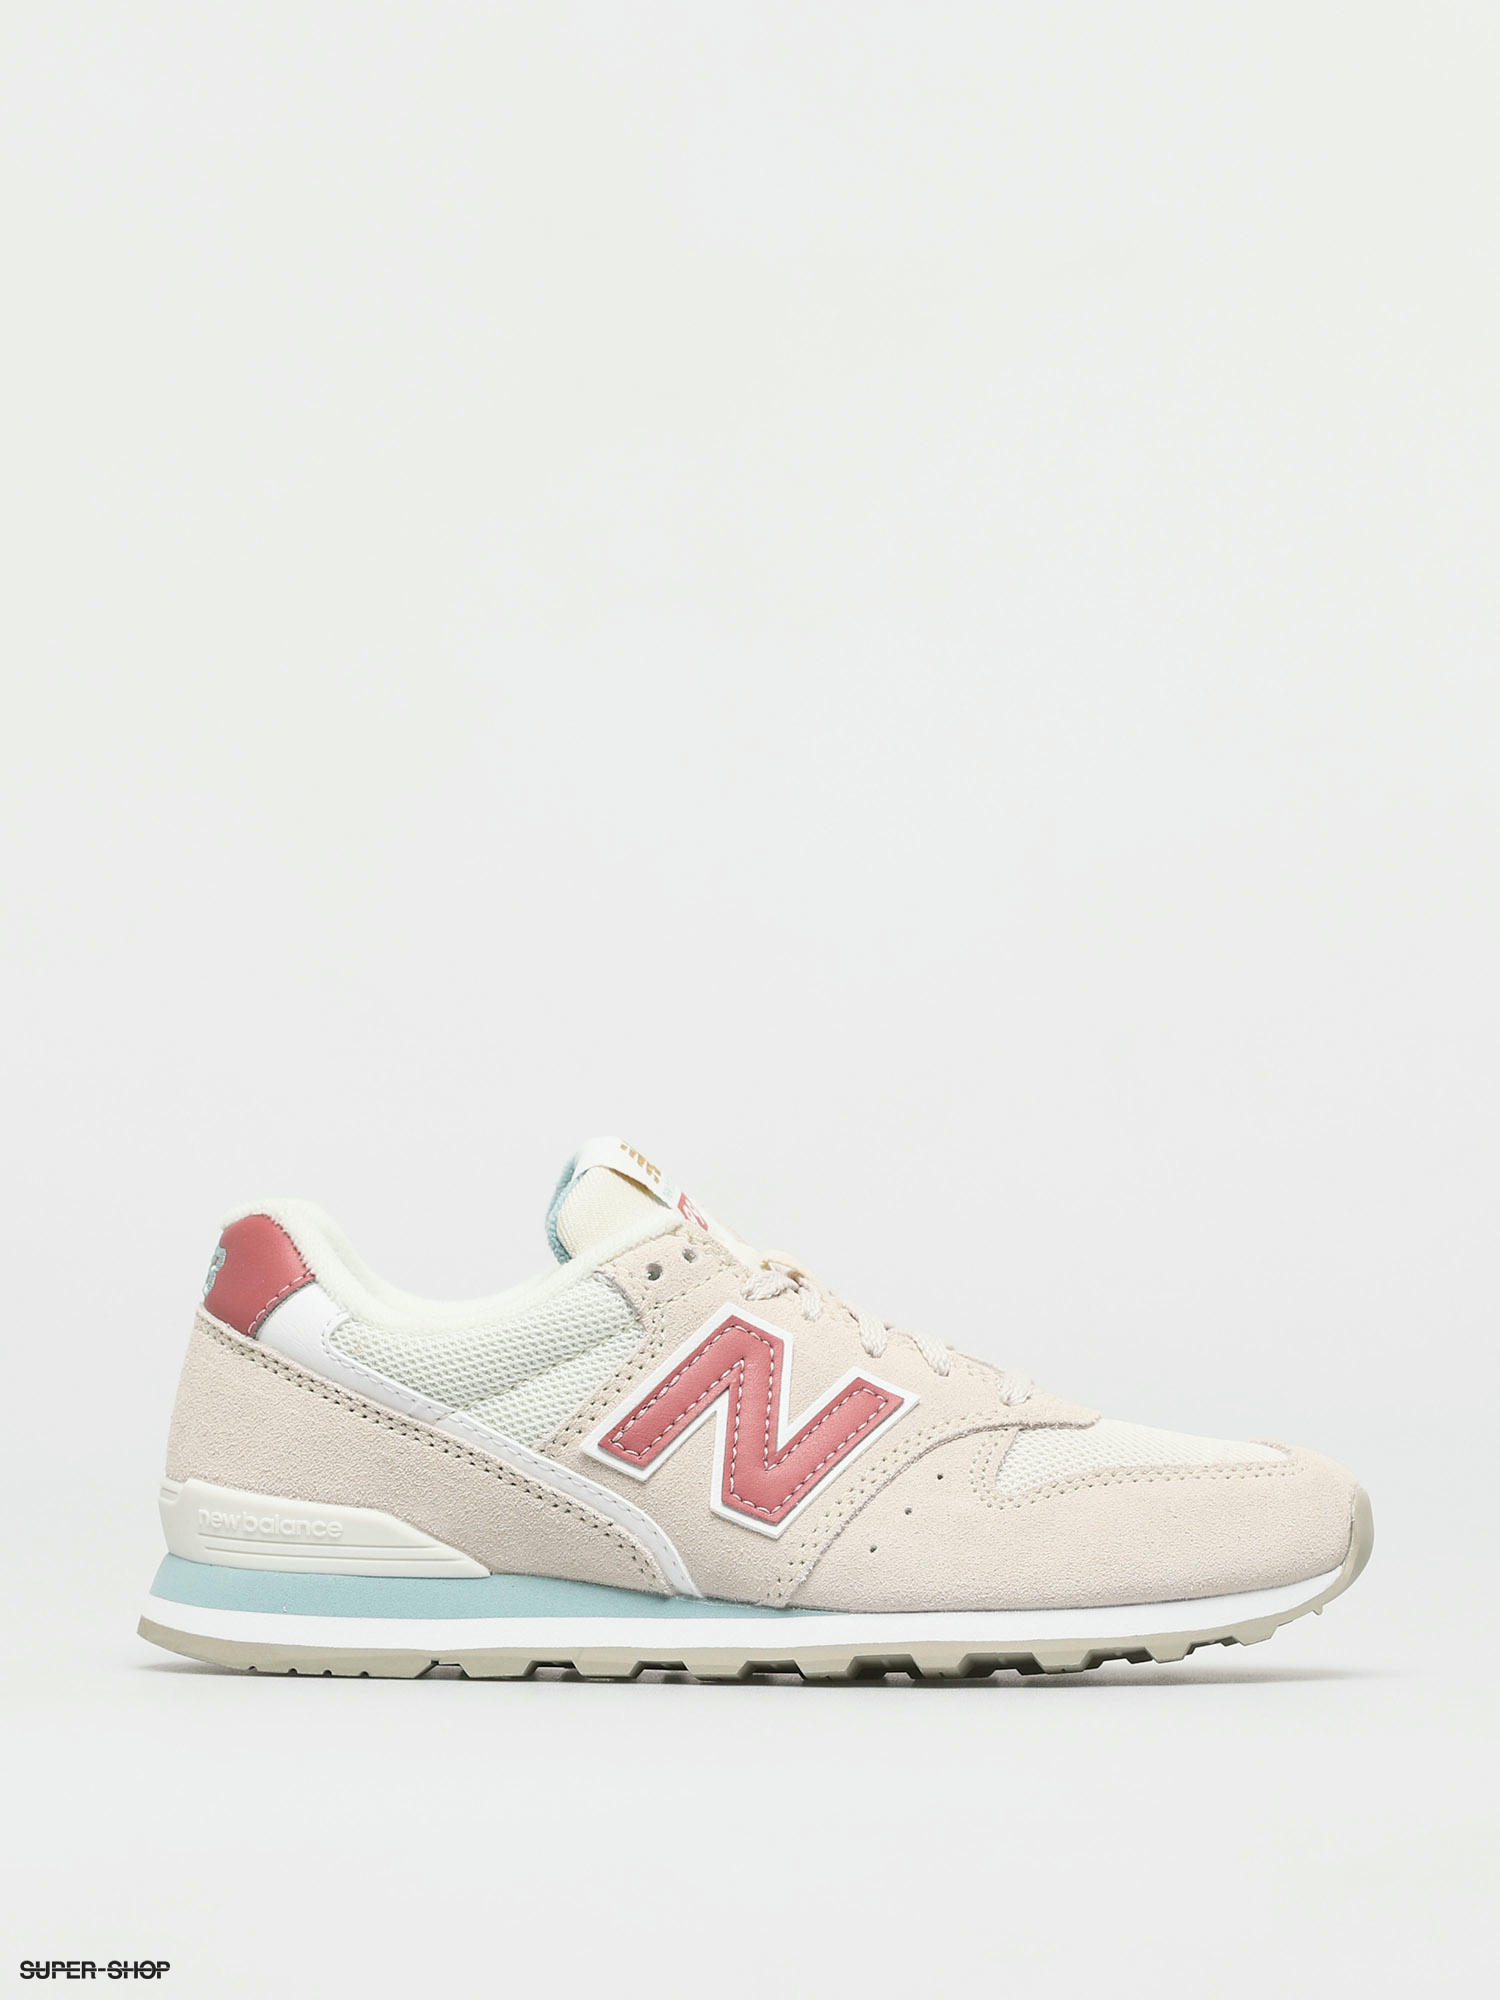 new balance 996 winter sneaker collection